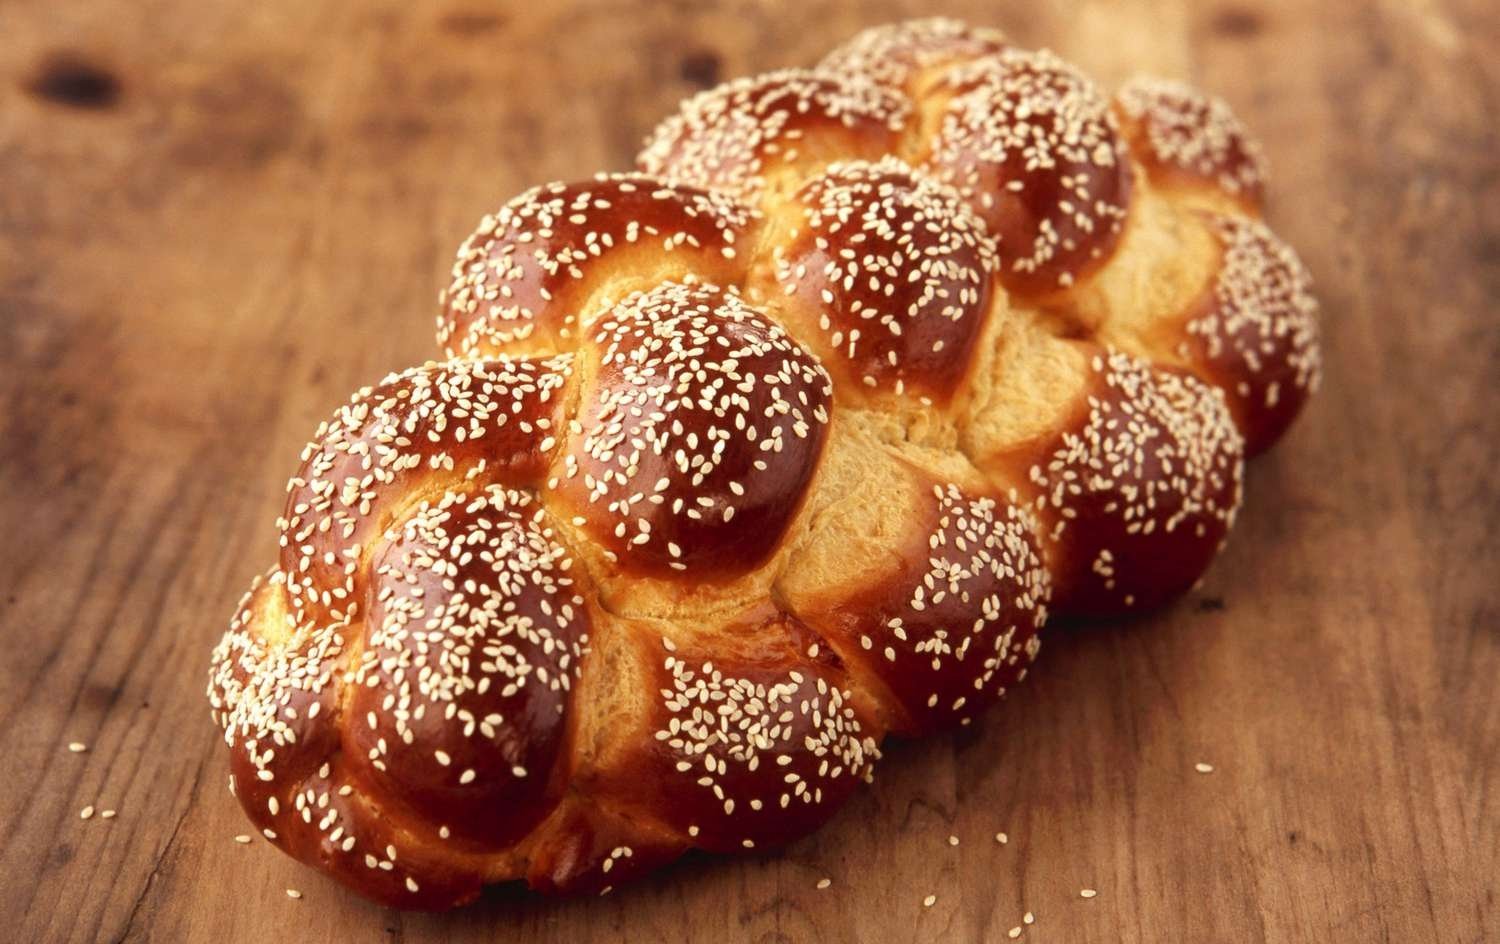 Join the Chabad of Ventura community for a memorable Mega Challah Bake event. Experience the joy of baking, celebrate Jewish traditions, and embrace the spirit of Shabbat with women in Ventura County.